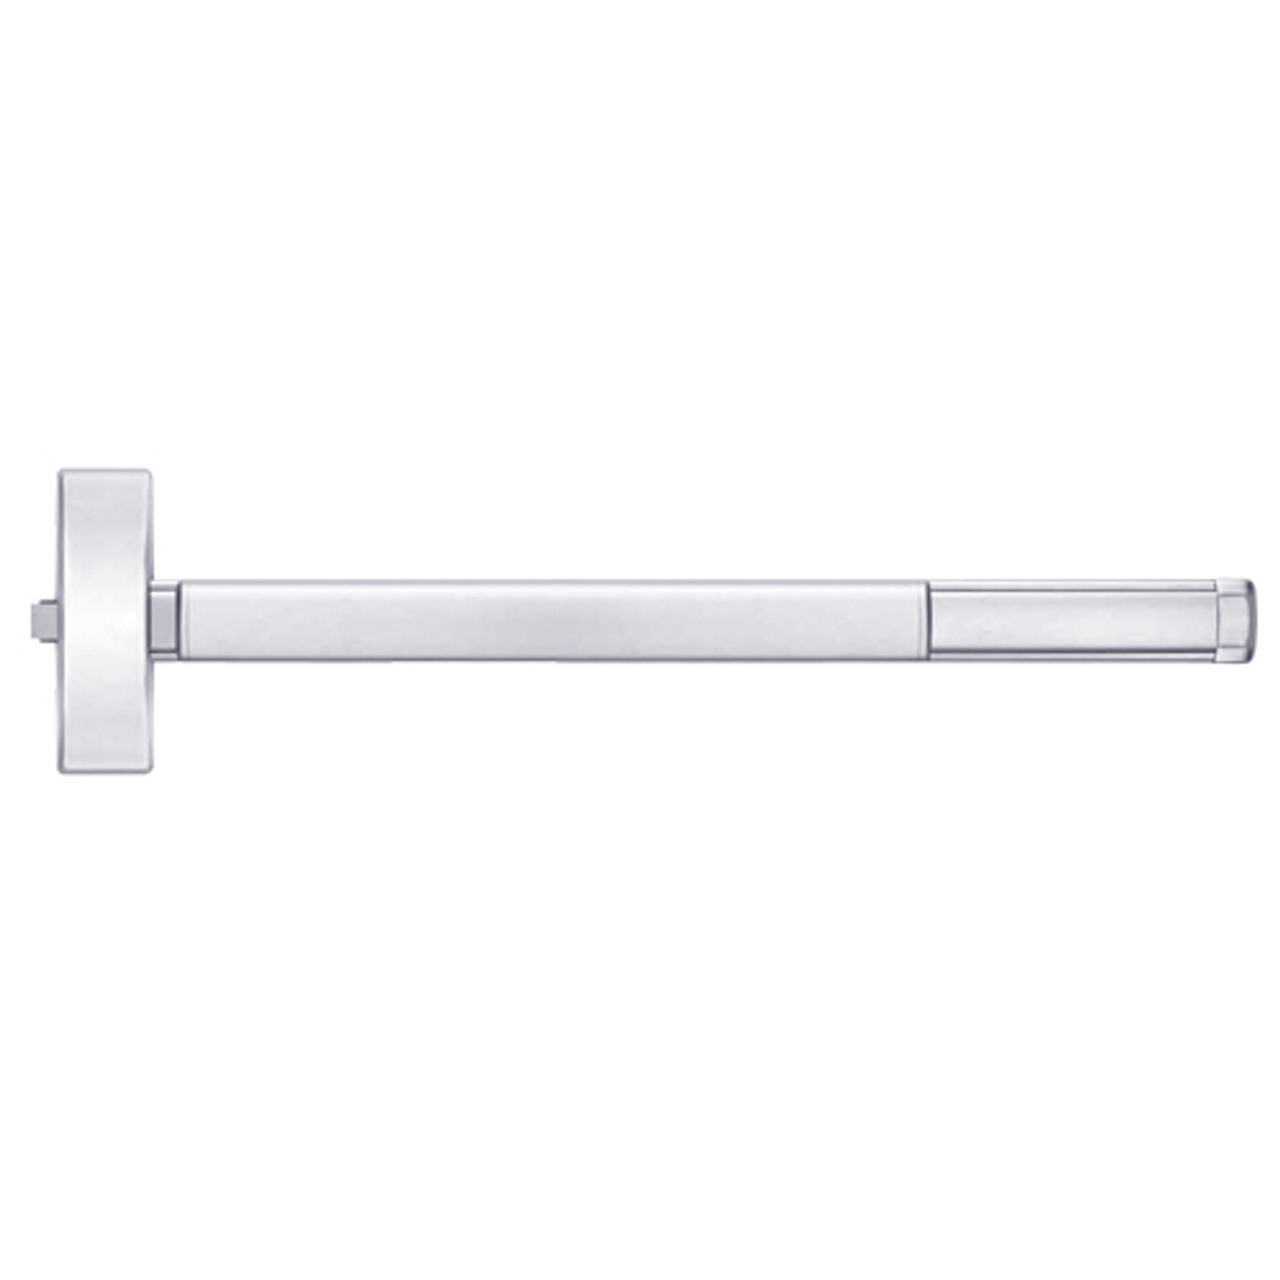 ELRFL2115-625-48 PHI 2100 Series Fire Rated Apex Rim Exit Device with Electric Latch Retraction Prepped for Thumb Piece Always Active in Bright Chrome Finish